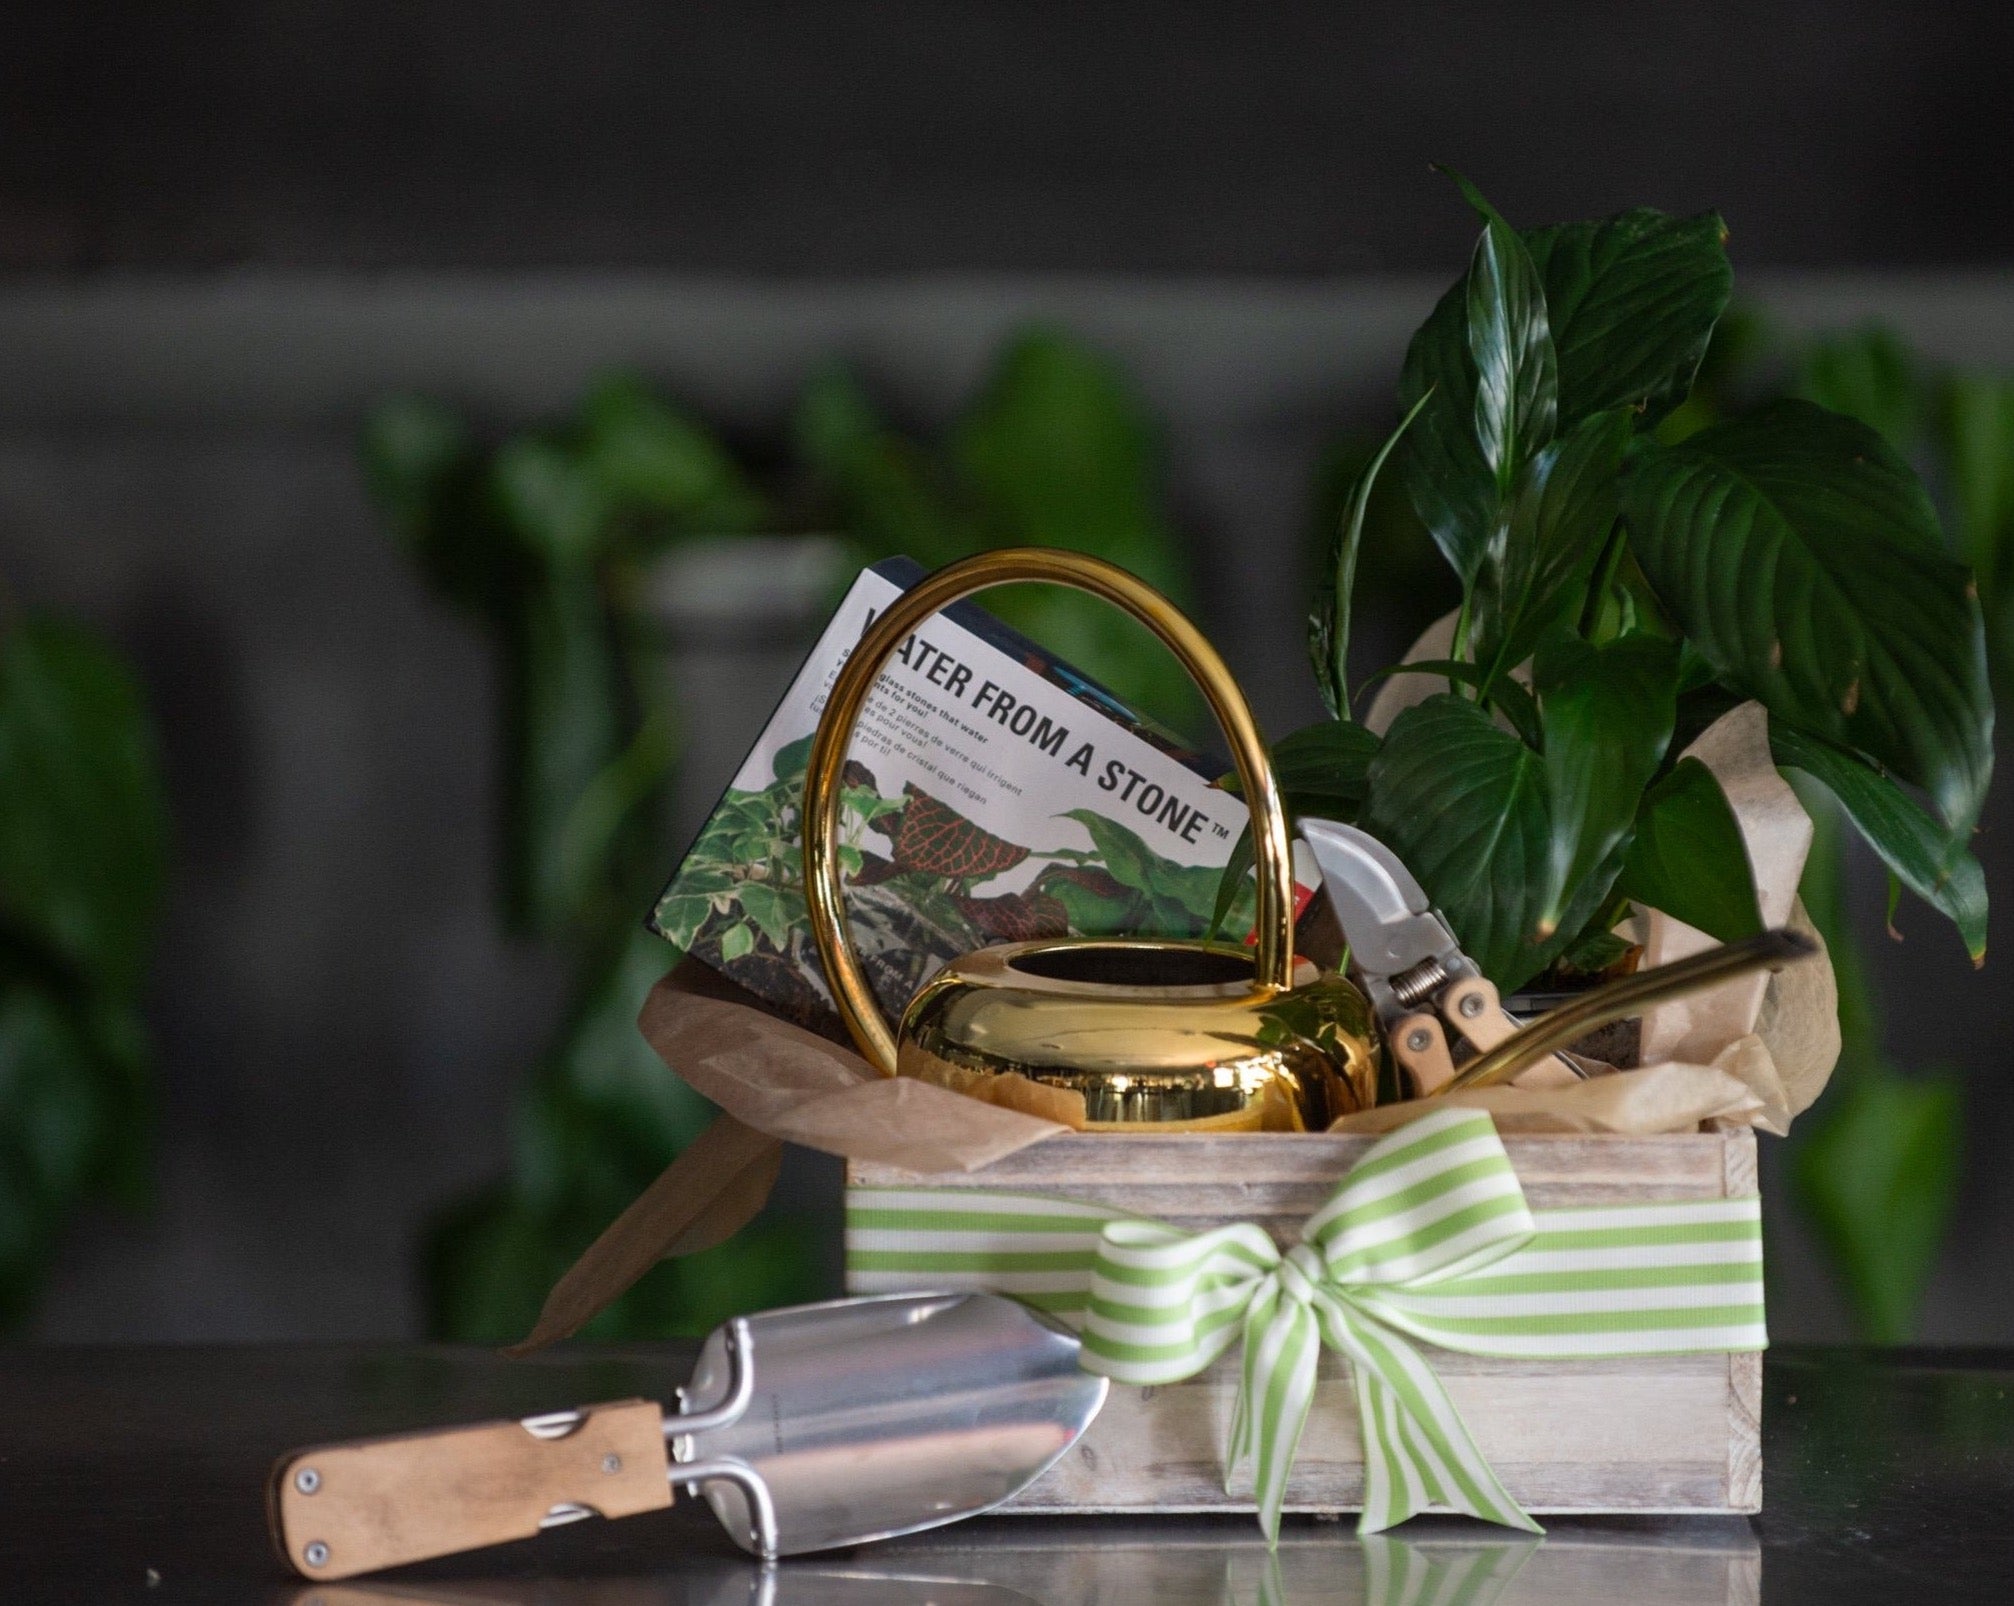 Garden Bounty Box is a wooden gift box filled with a gold watering can, gardening tools, water from a stone, and a potted plant, finished with a bow